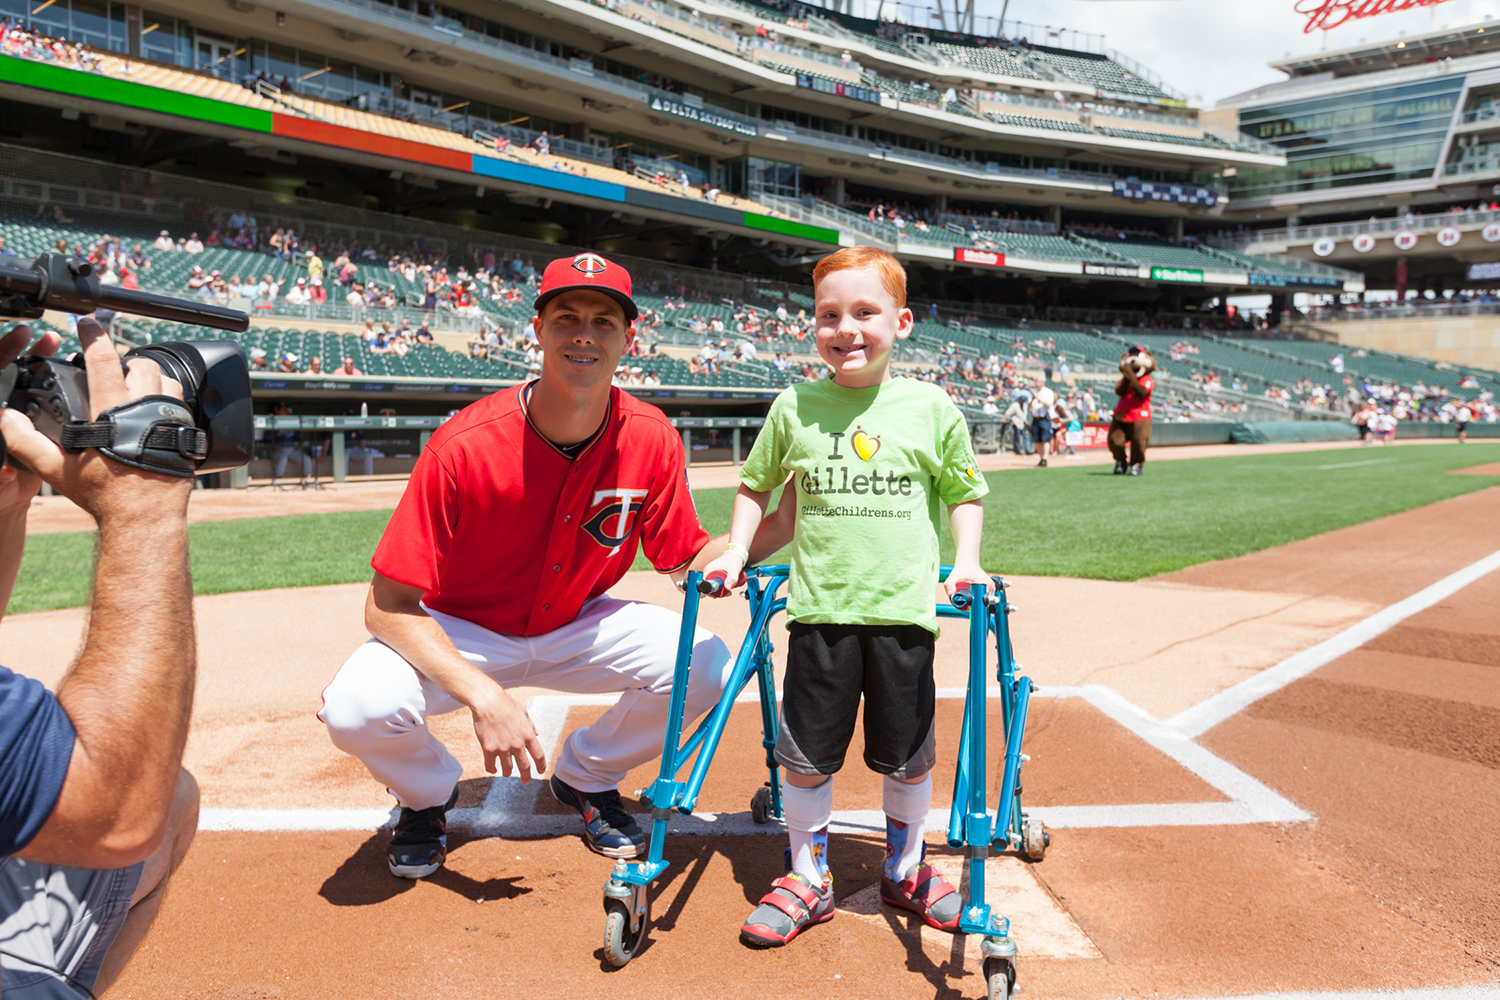 Cameron and Twins pitcher Taylor Rogers.